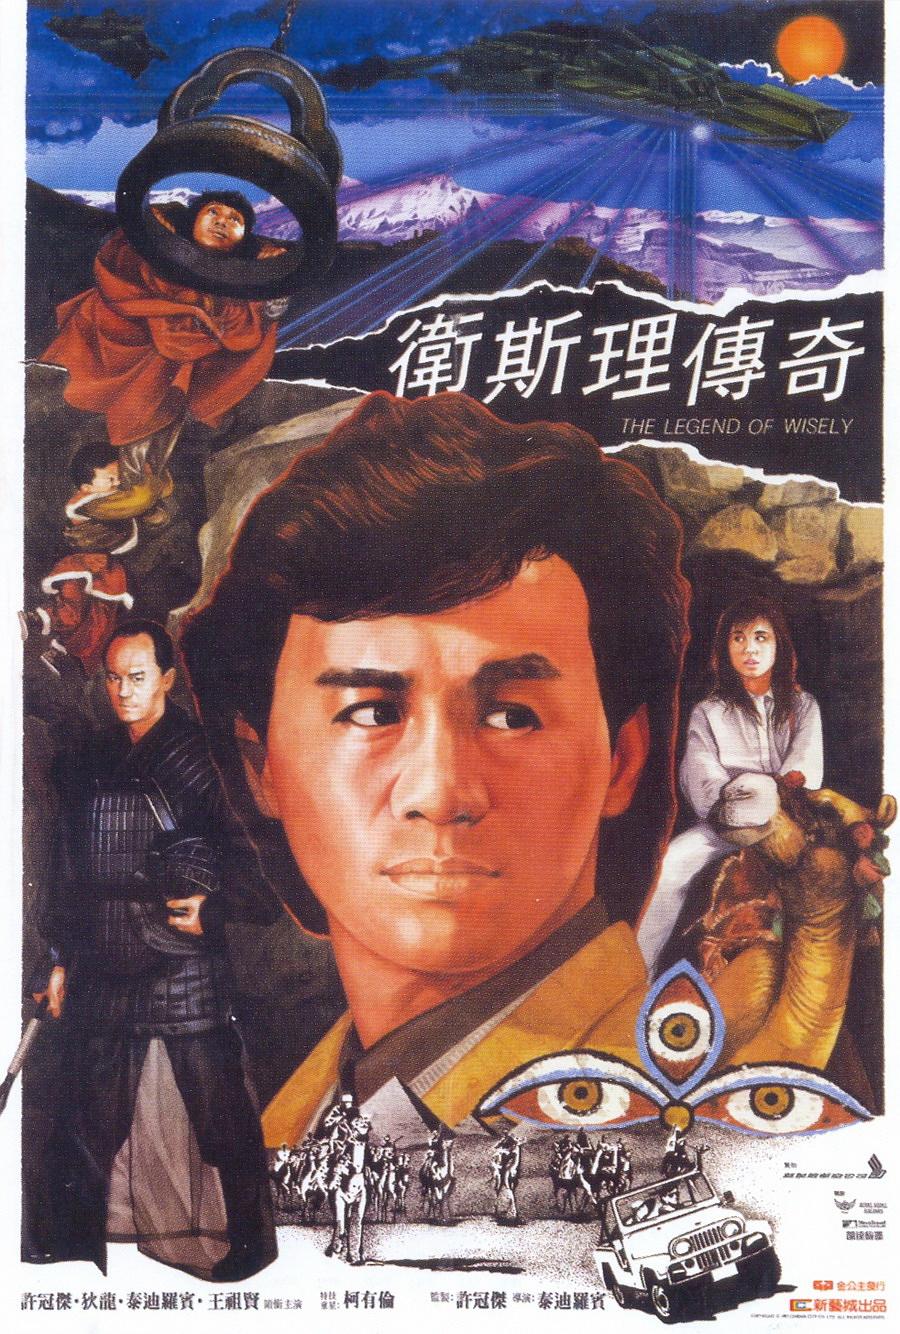 l˹ The.Legend.of.Wisely.1987.CHINESE.1080p.BluRay.x264.DTS-FGT 8.05GB-1.png